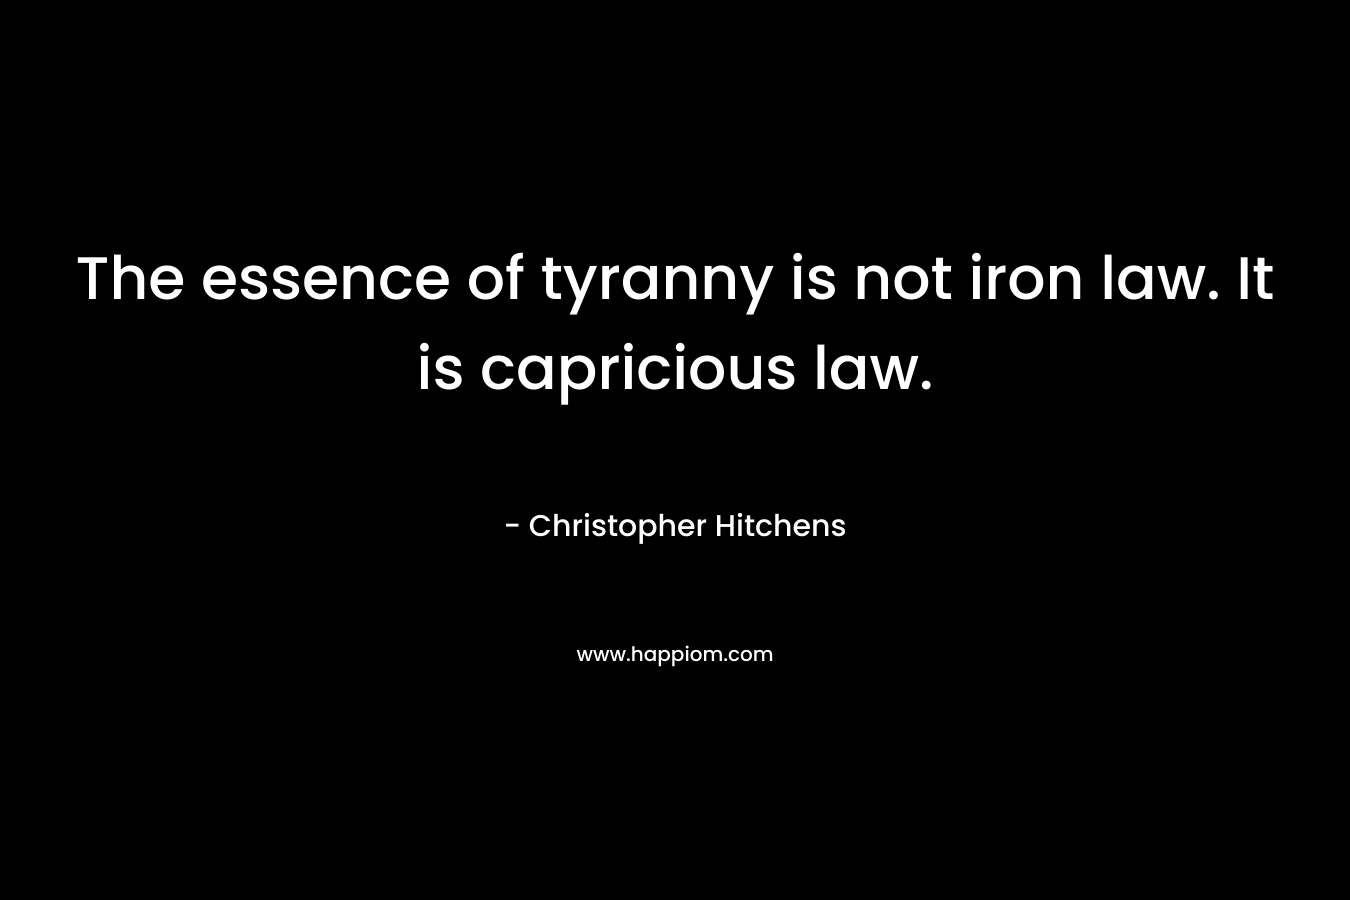 The essence of tyranny is not iron law. It is capricious law.